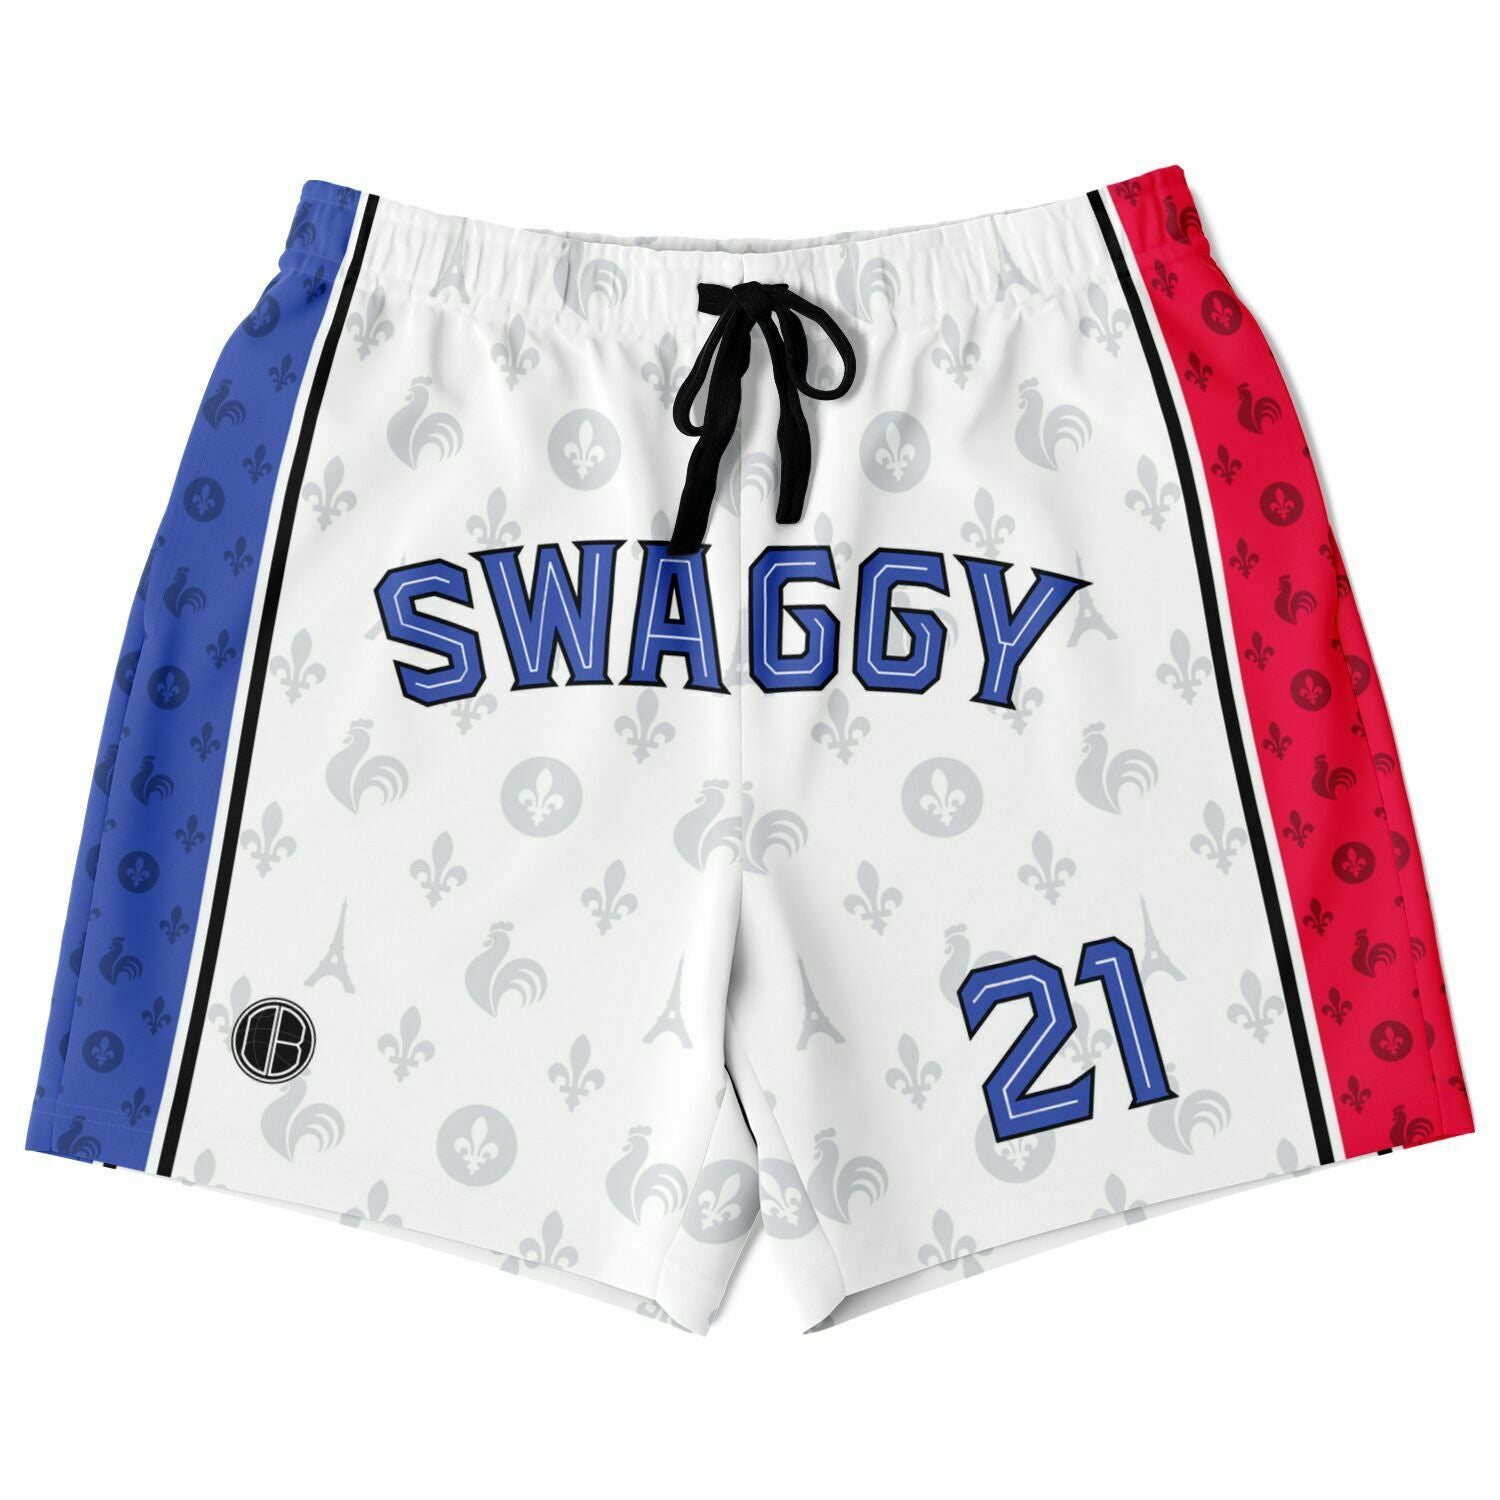 DearBBall Fashion Short - SWAGGY France Royauté White Edition